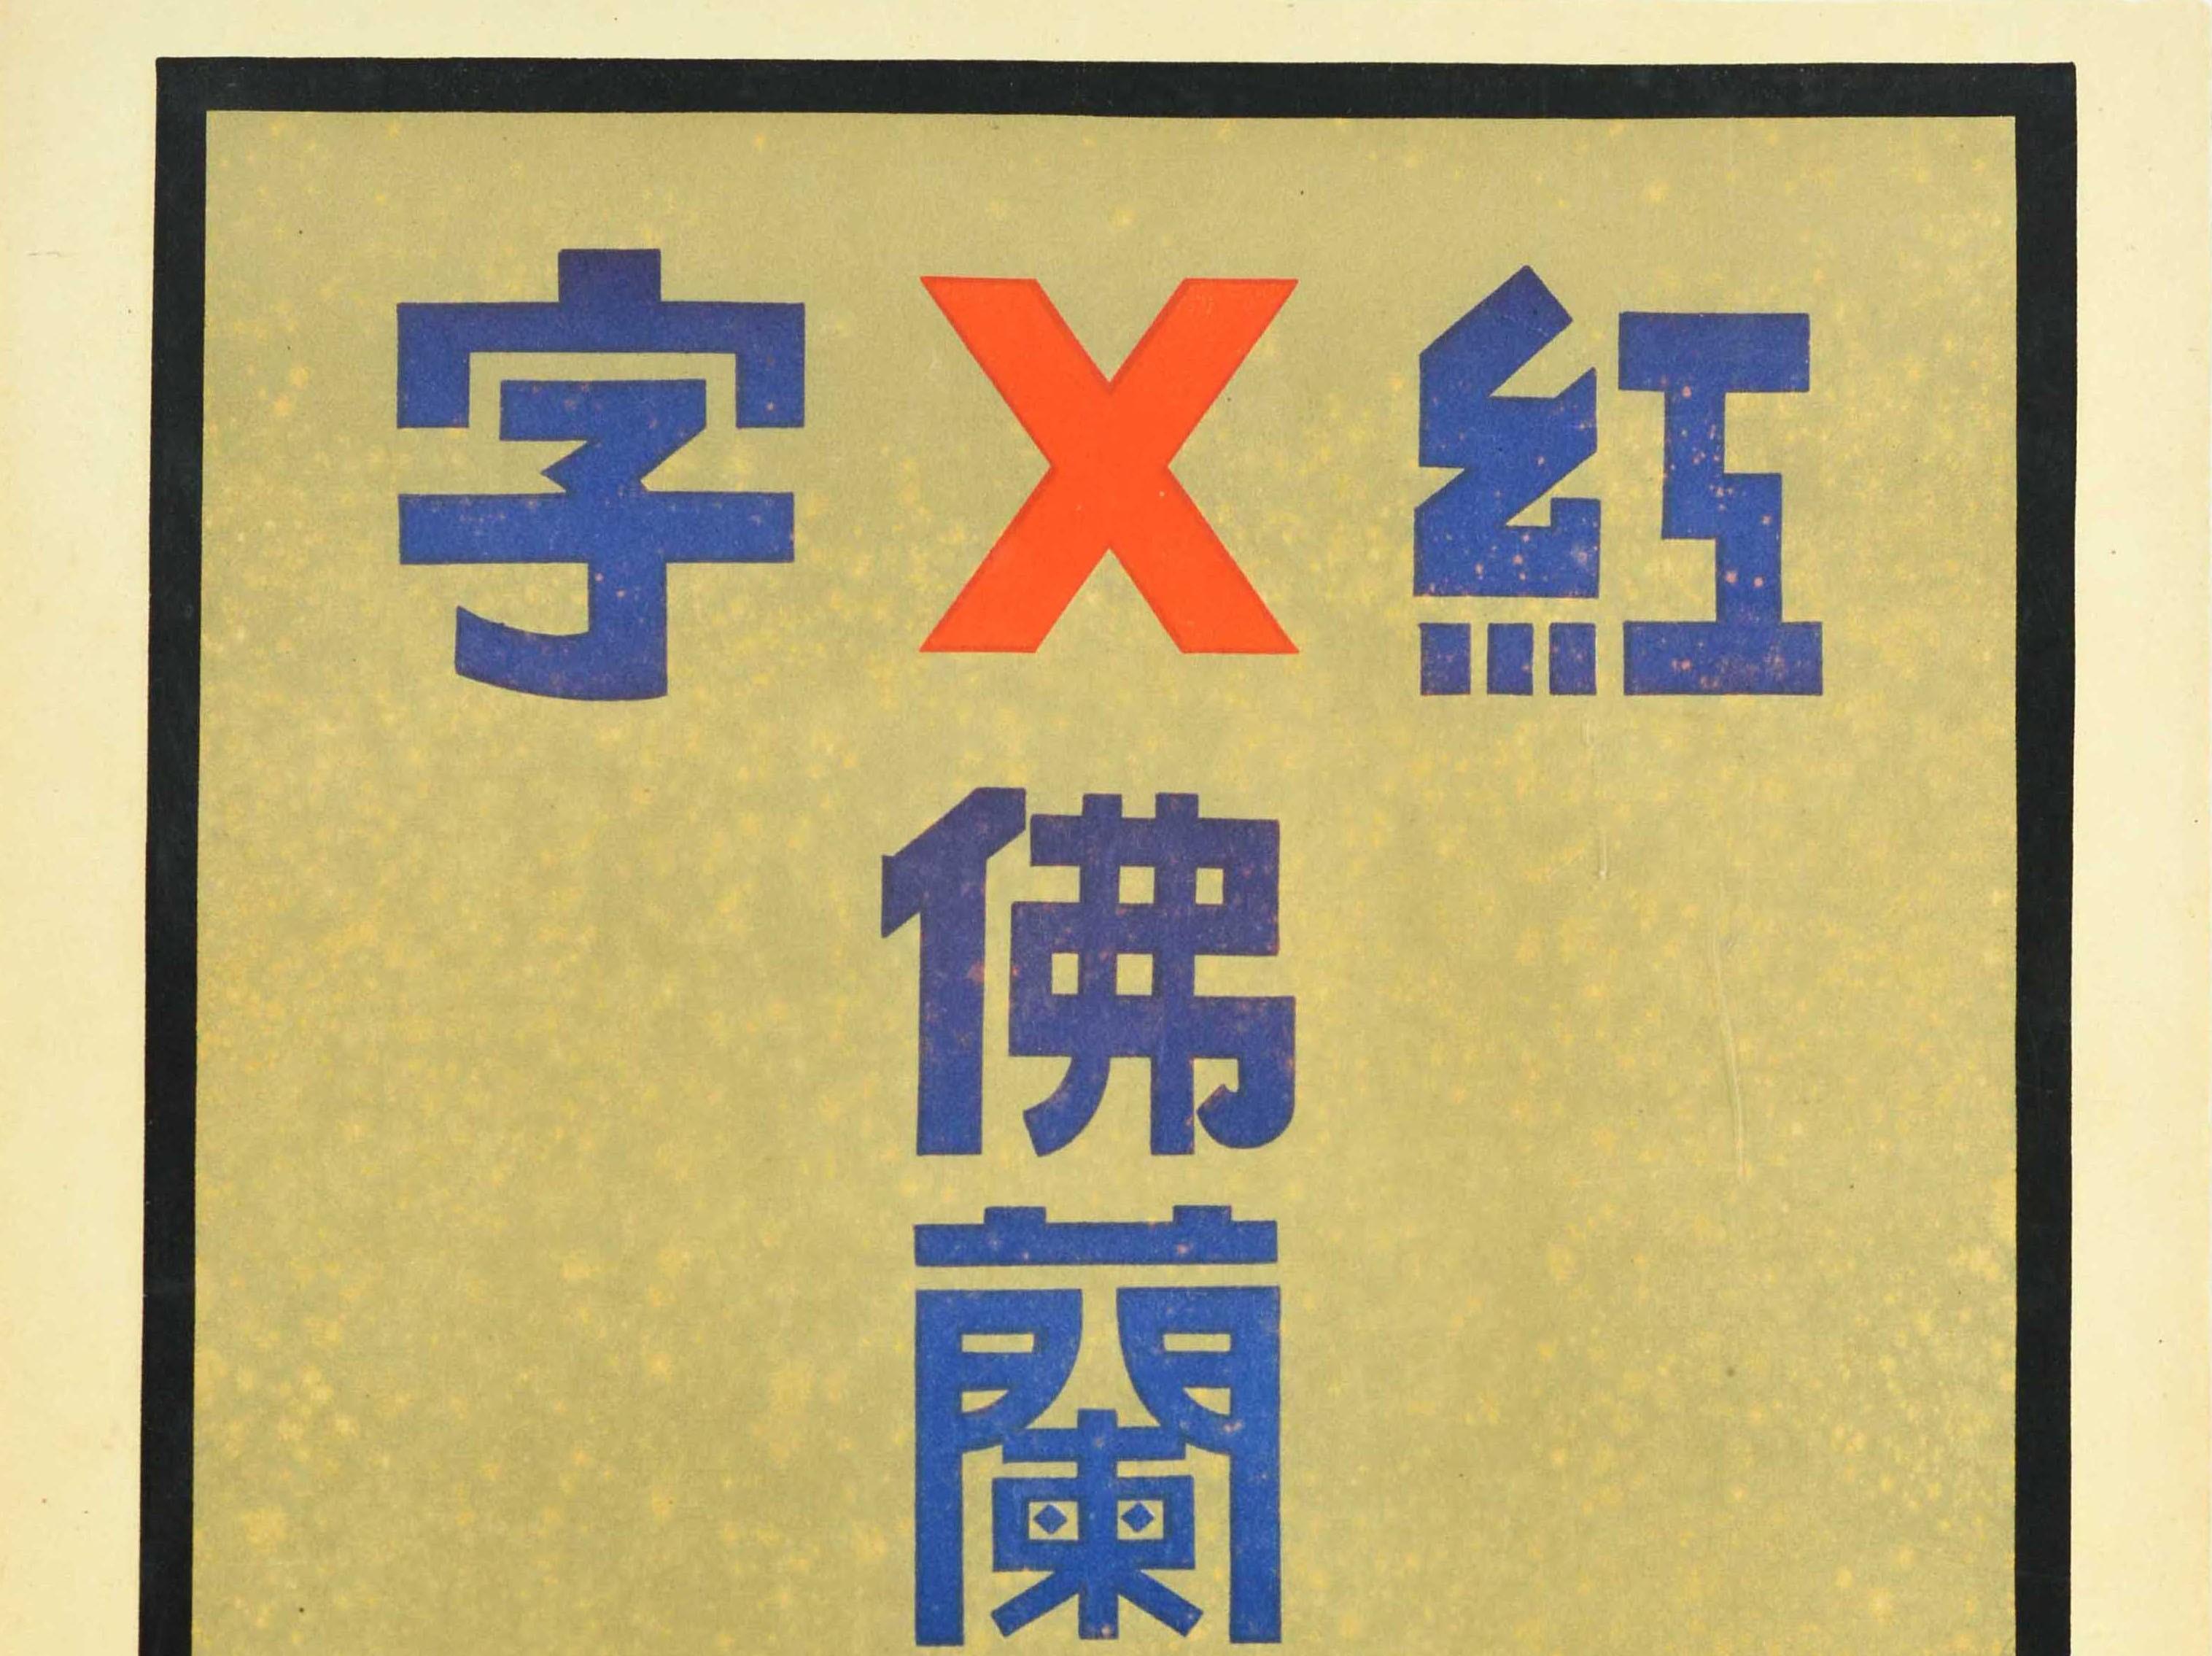 Original vintage drink advertising poster for Scarlet Flemish Wine ?????? featuring the bold blue text in Chinese characters across and down from a red X to form a T shape within the black line border. Printed by Oberthur, Rennes. c.1930s. Good